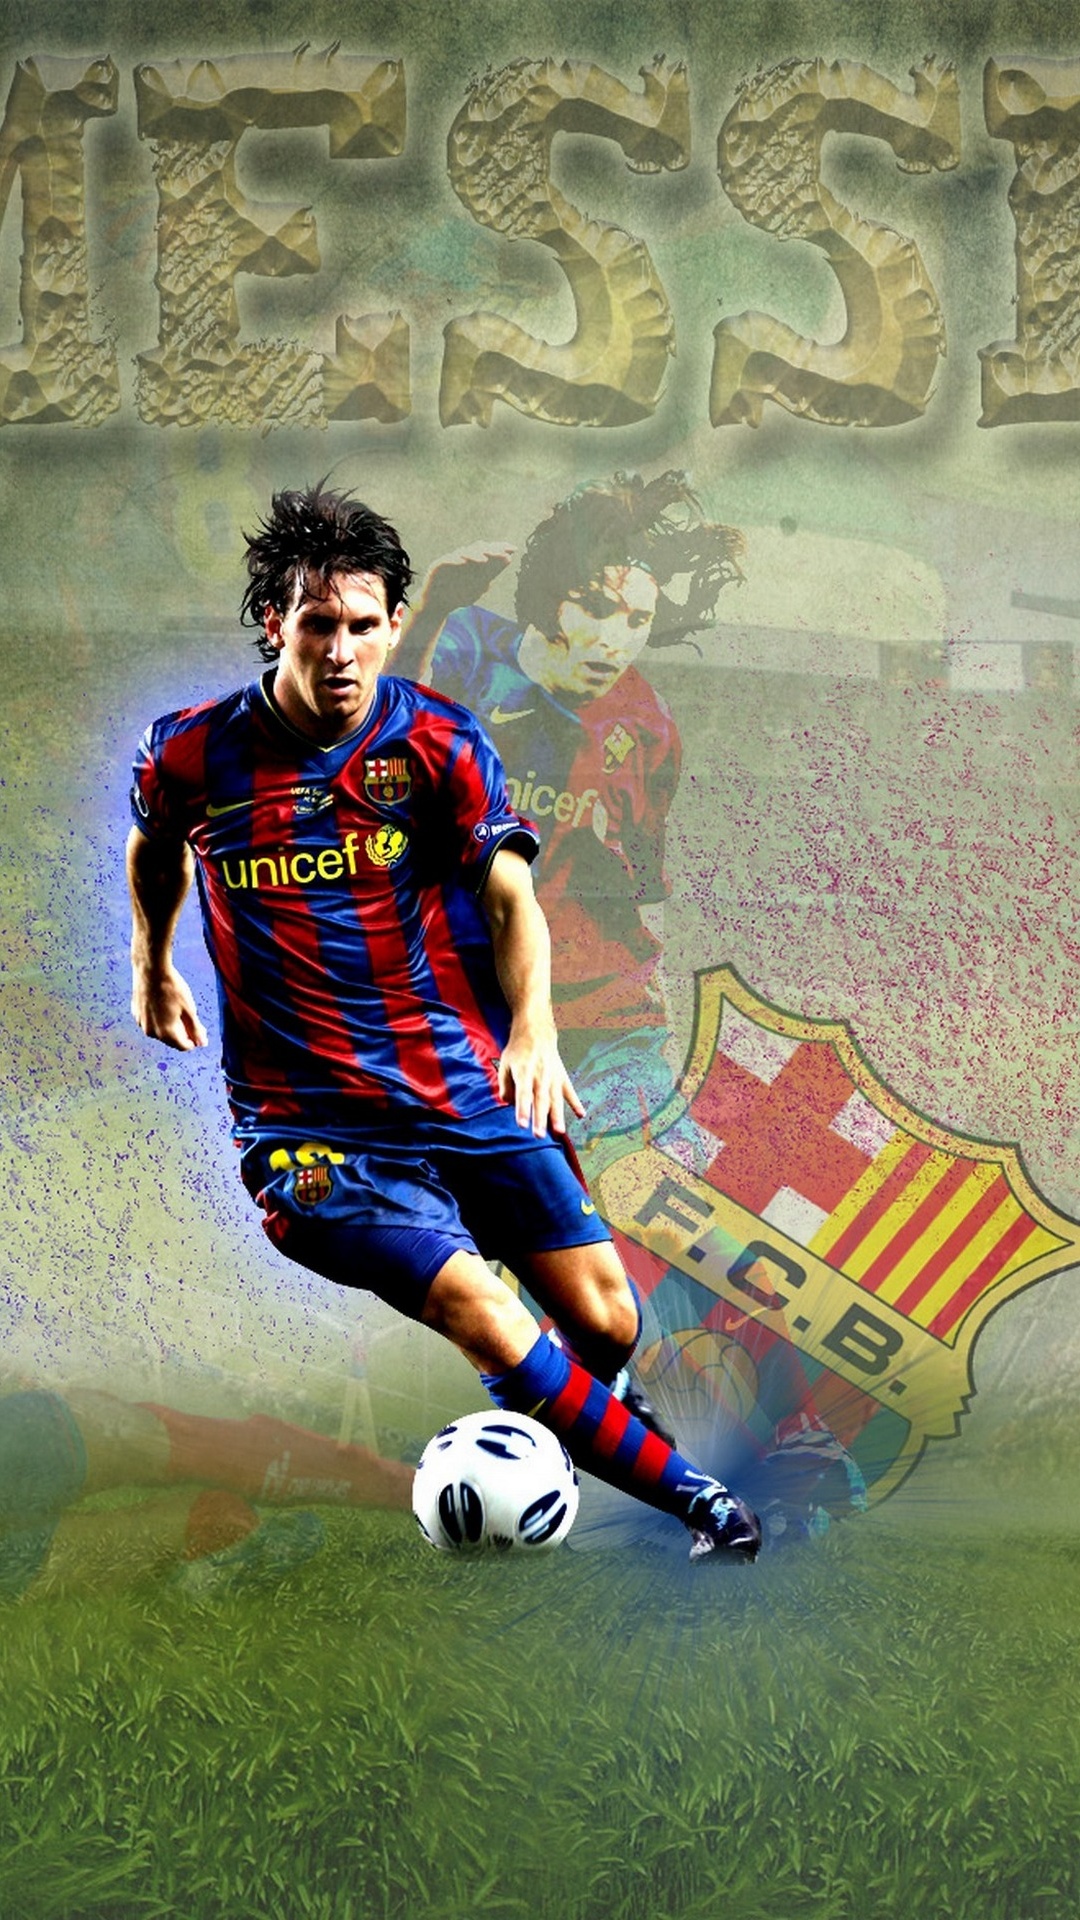 Wallpaper for galaxy s4 with Lionel Messi in Barcelona uniform in 1080x1920 resolution